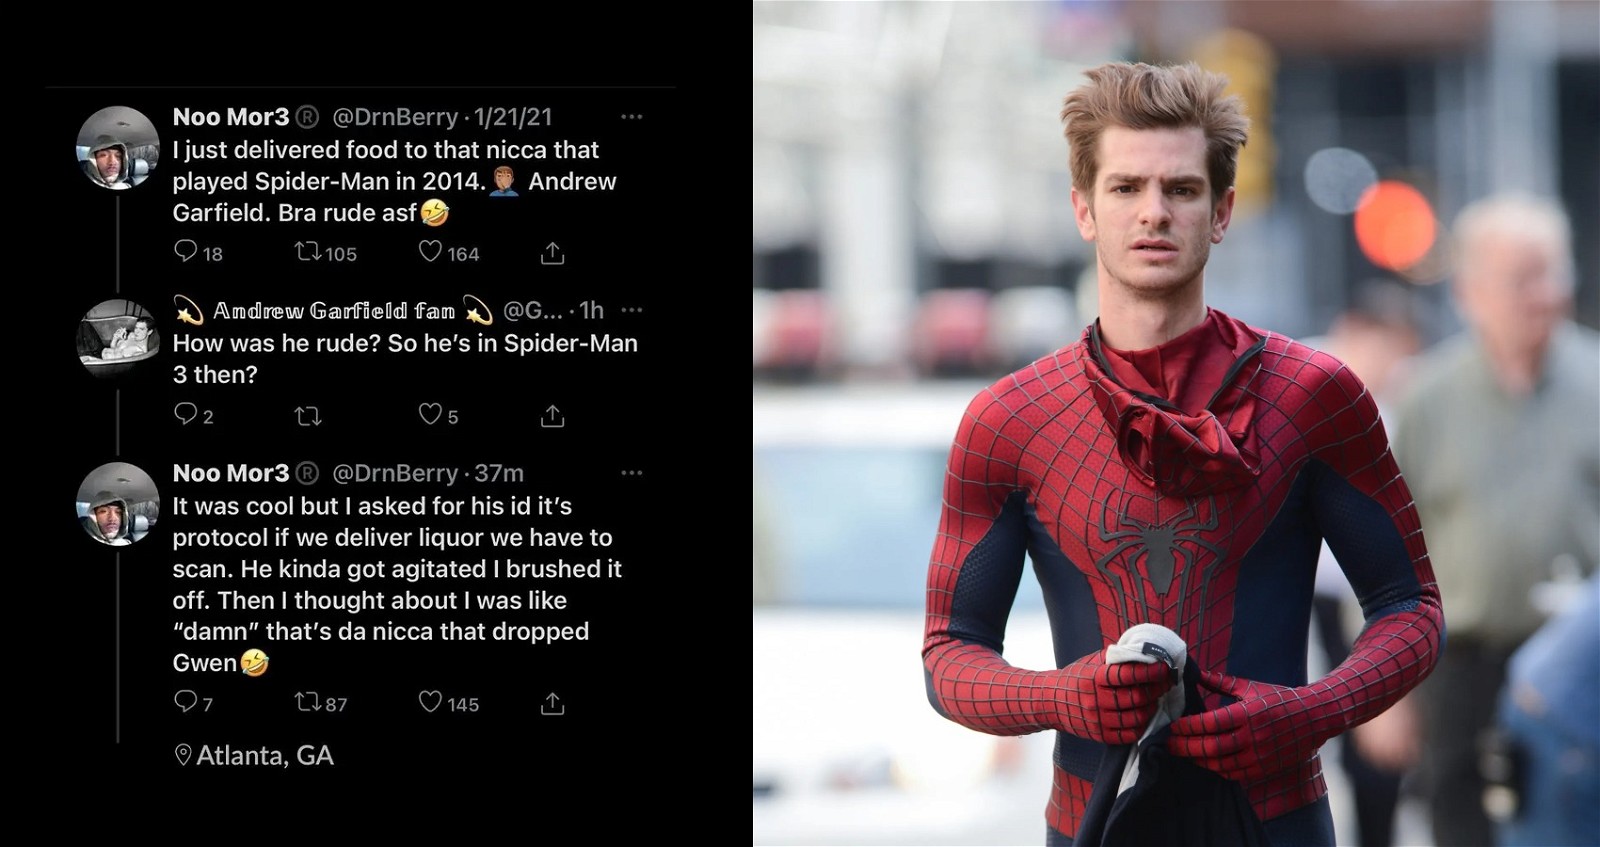 DoorDash delivery person thought Andrew Garfield was "rude"